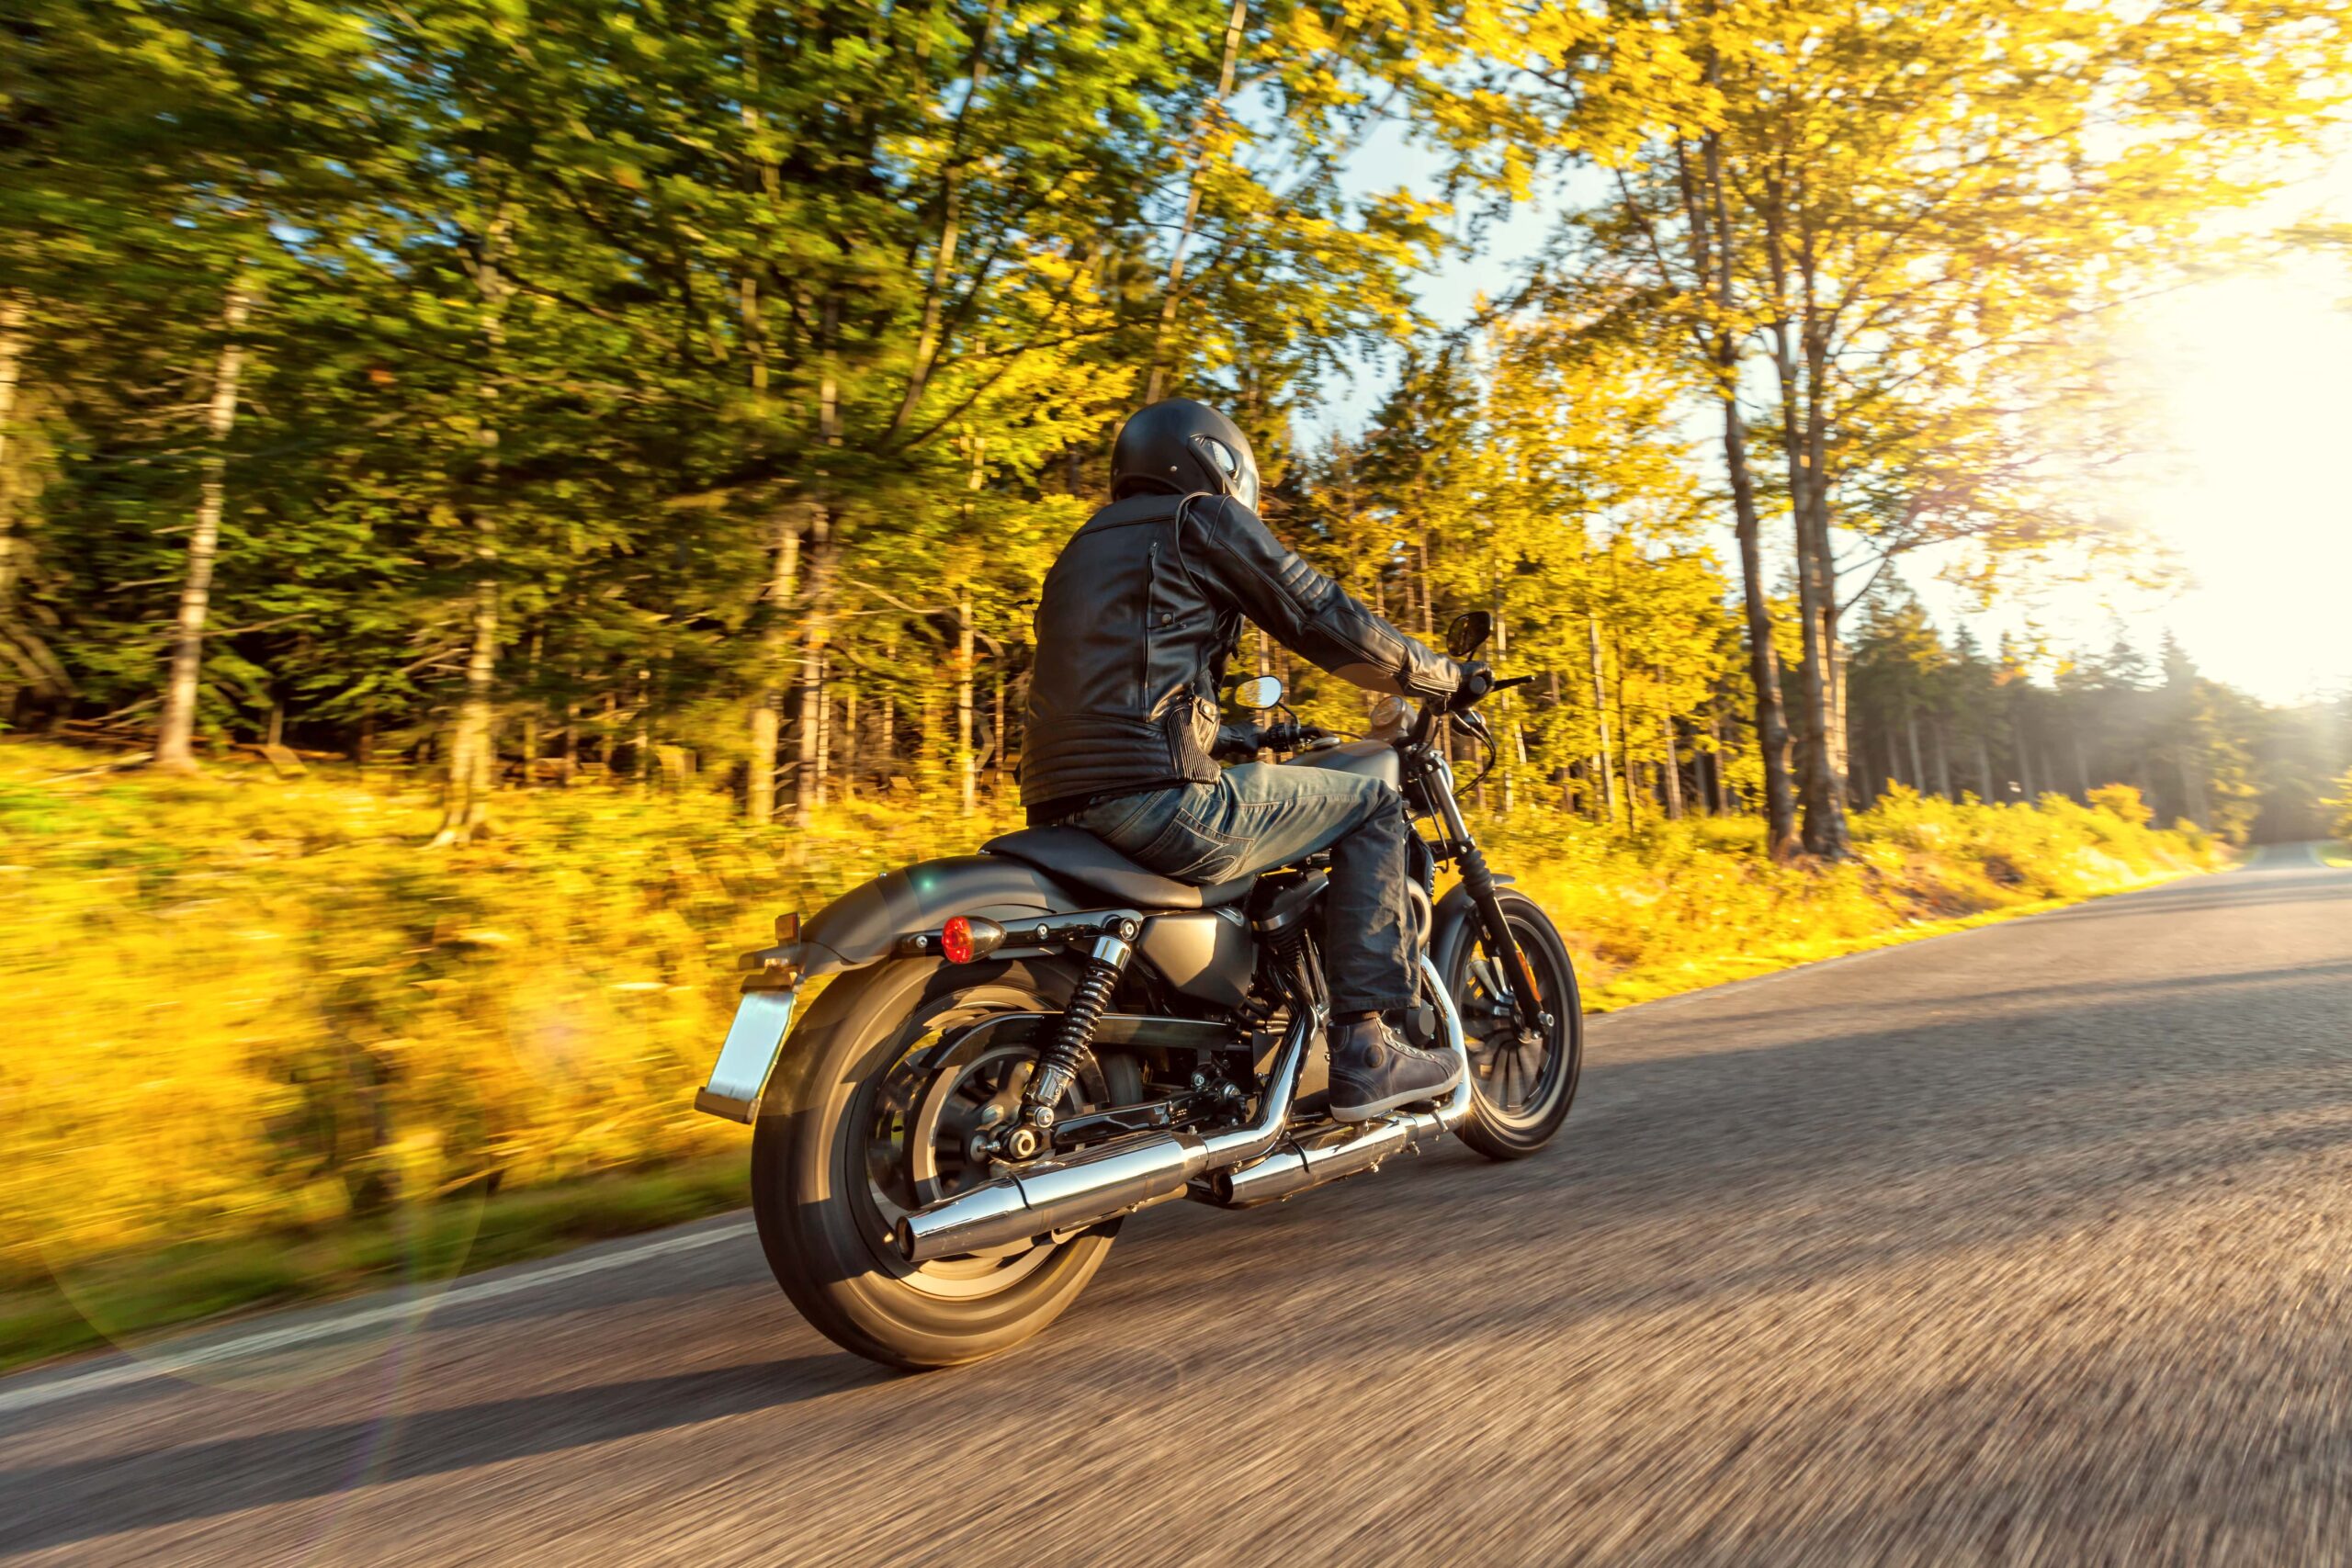 Motorcycle rider driving on road in autumn